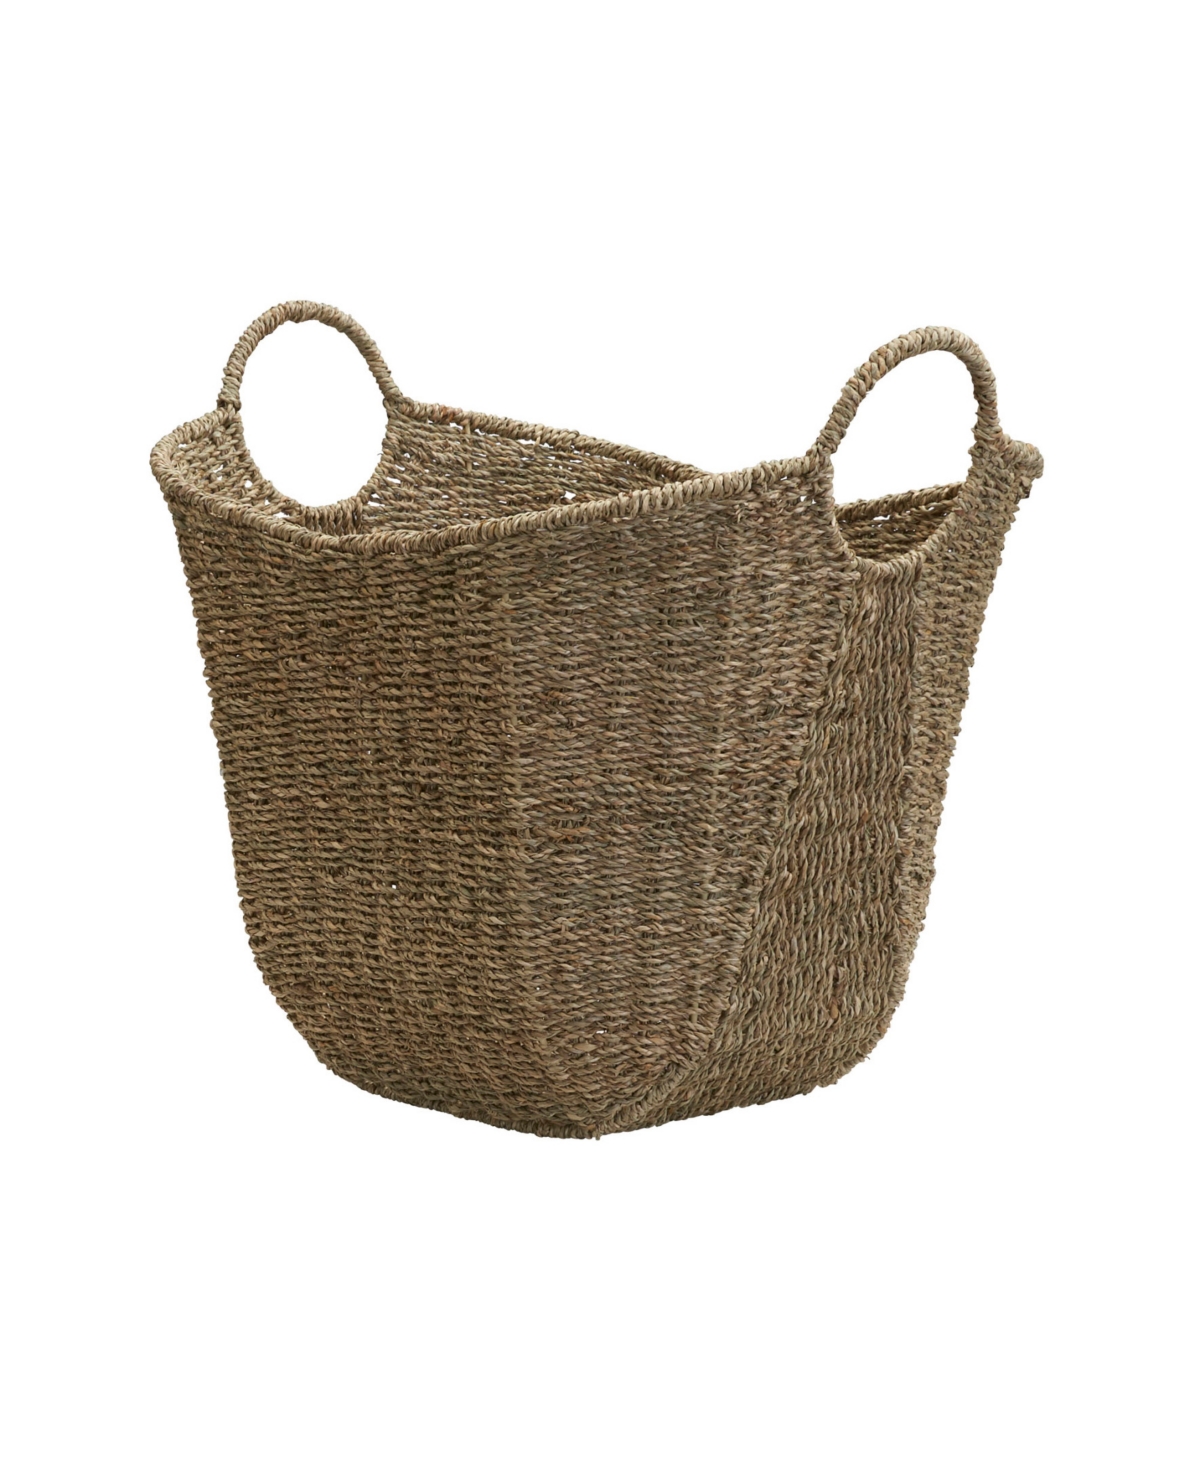 Natural Seagrass Basket with Handles - Natural